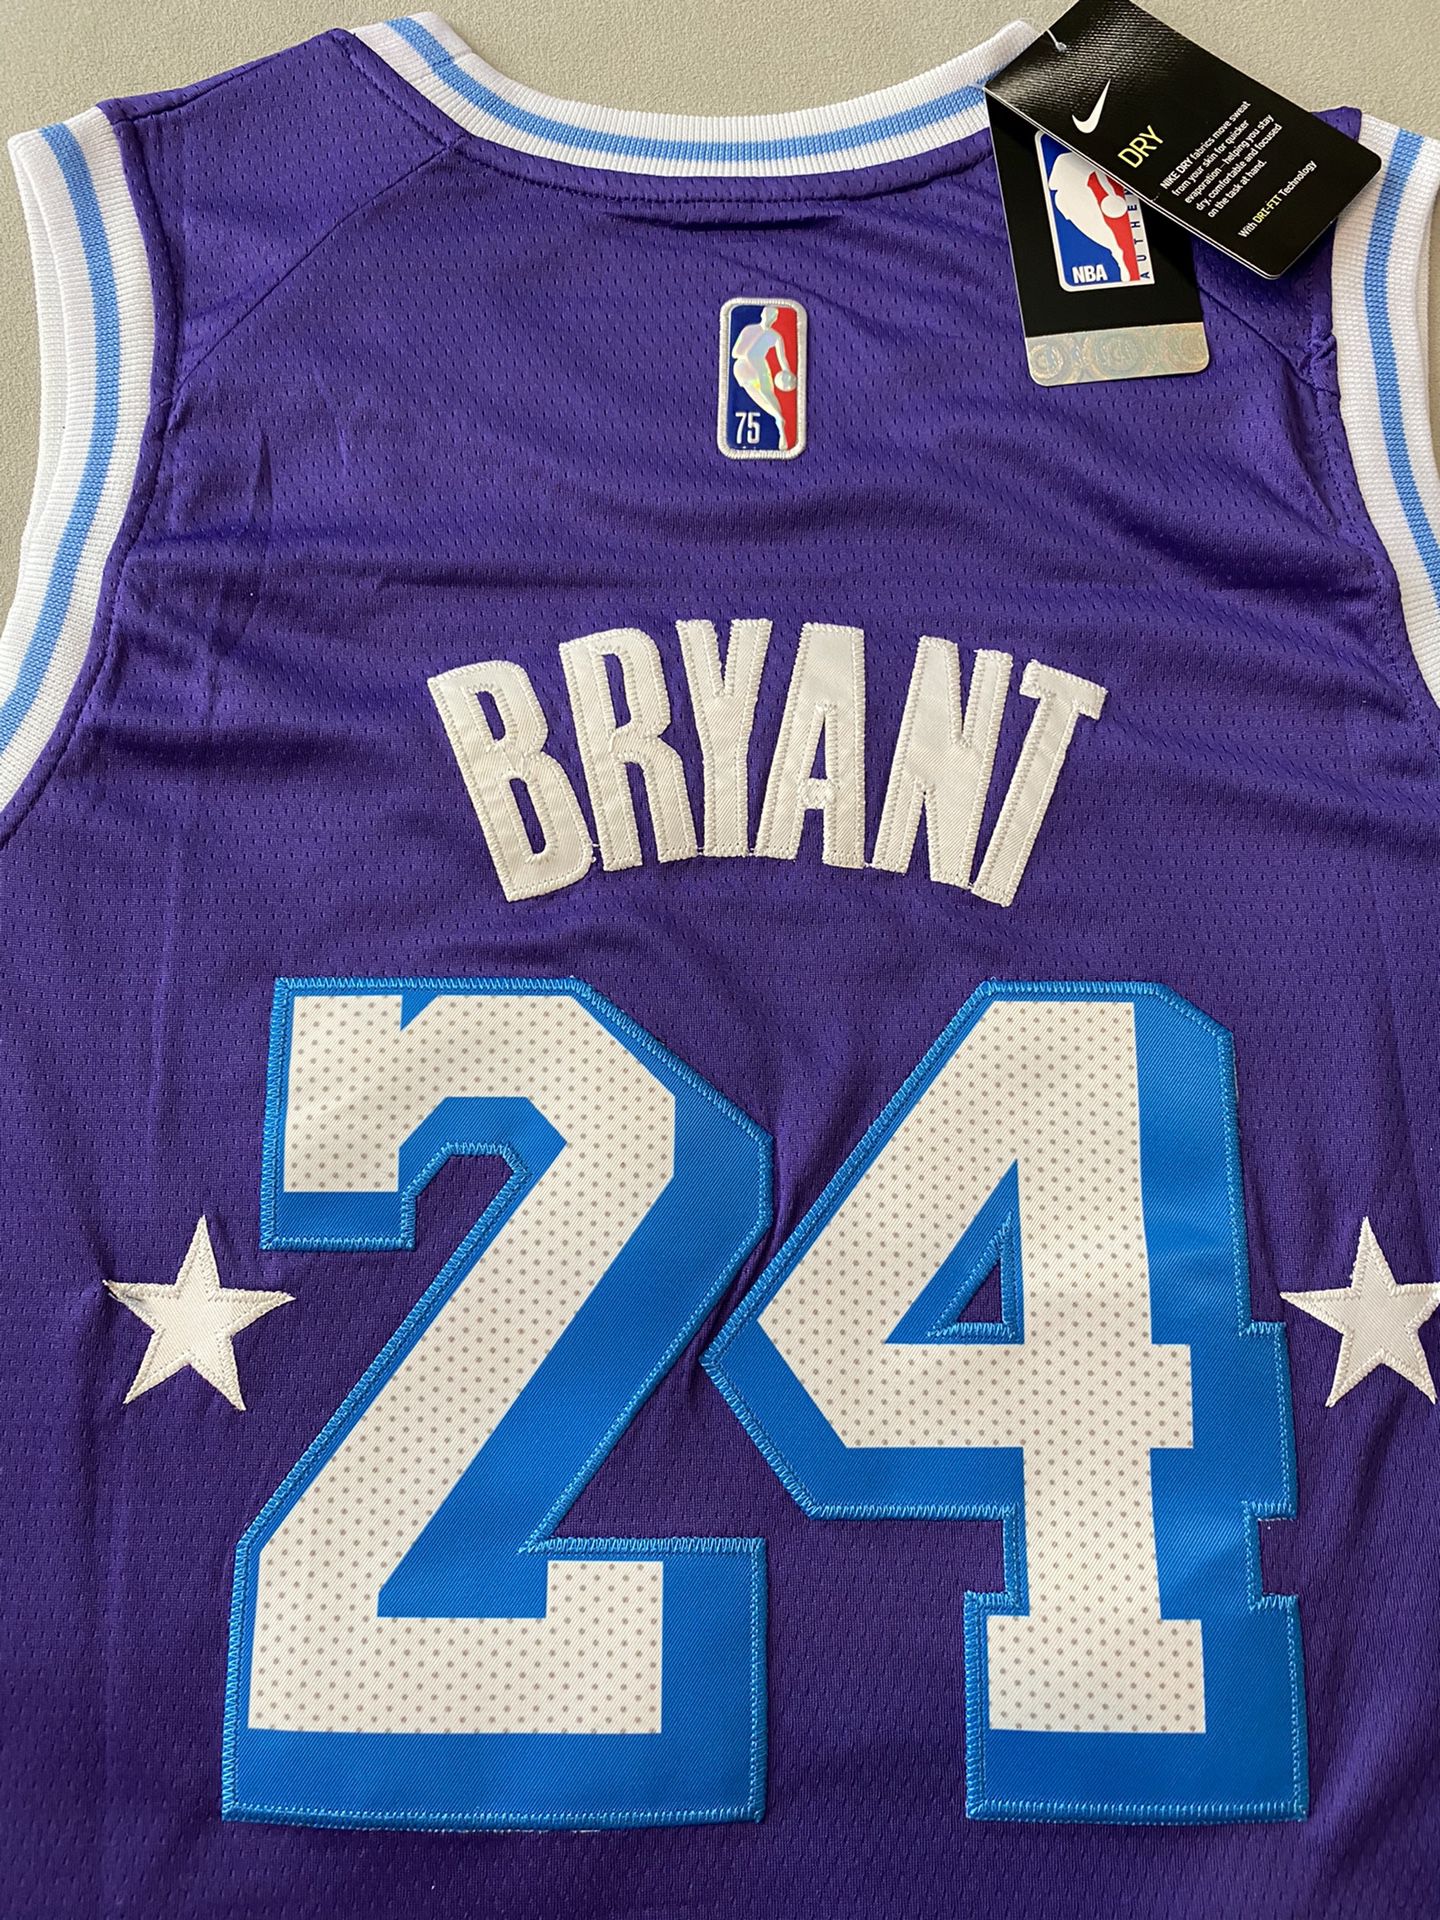 Youth Kobe Bryant Lakers Jersey for Sale in Hampton, VA - OfferUp